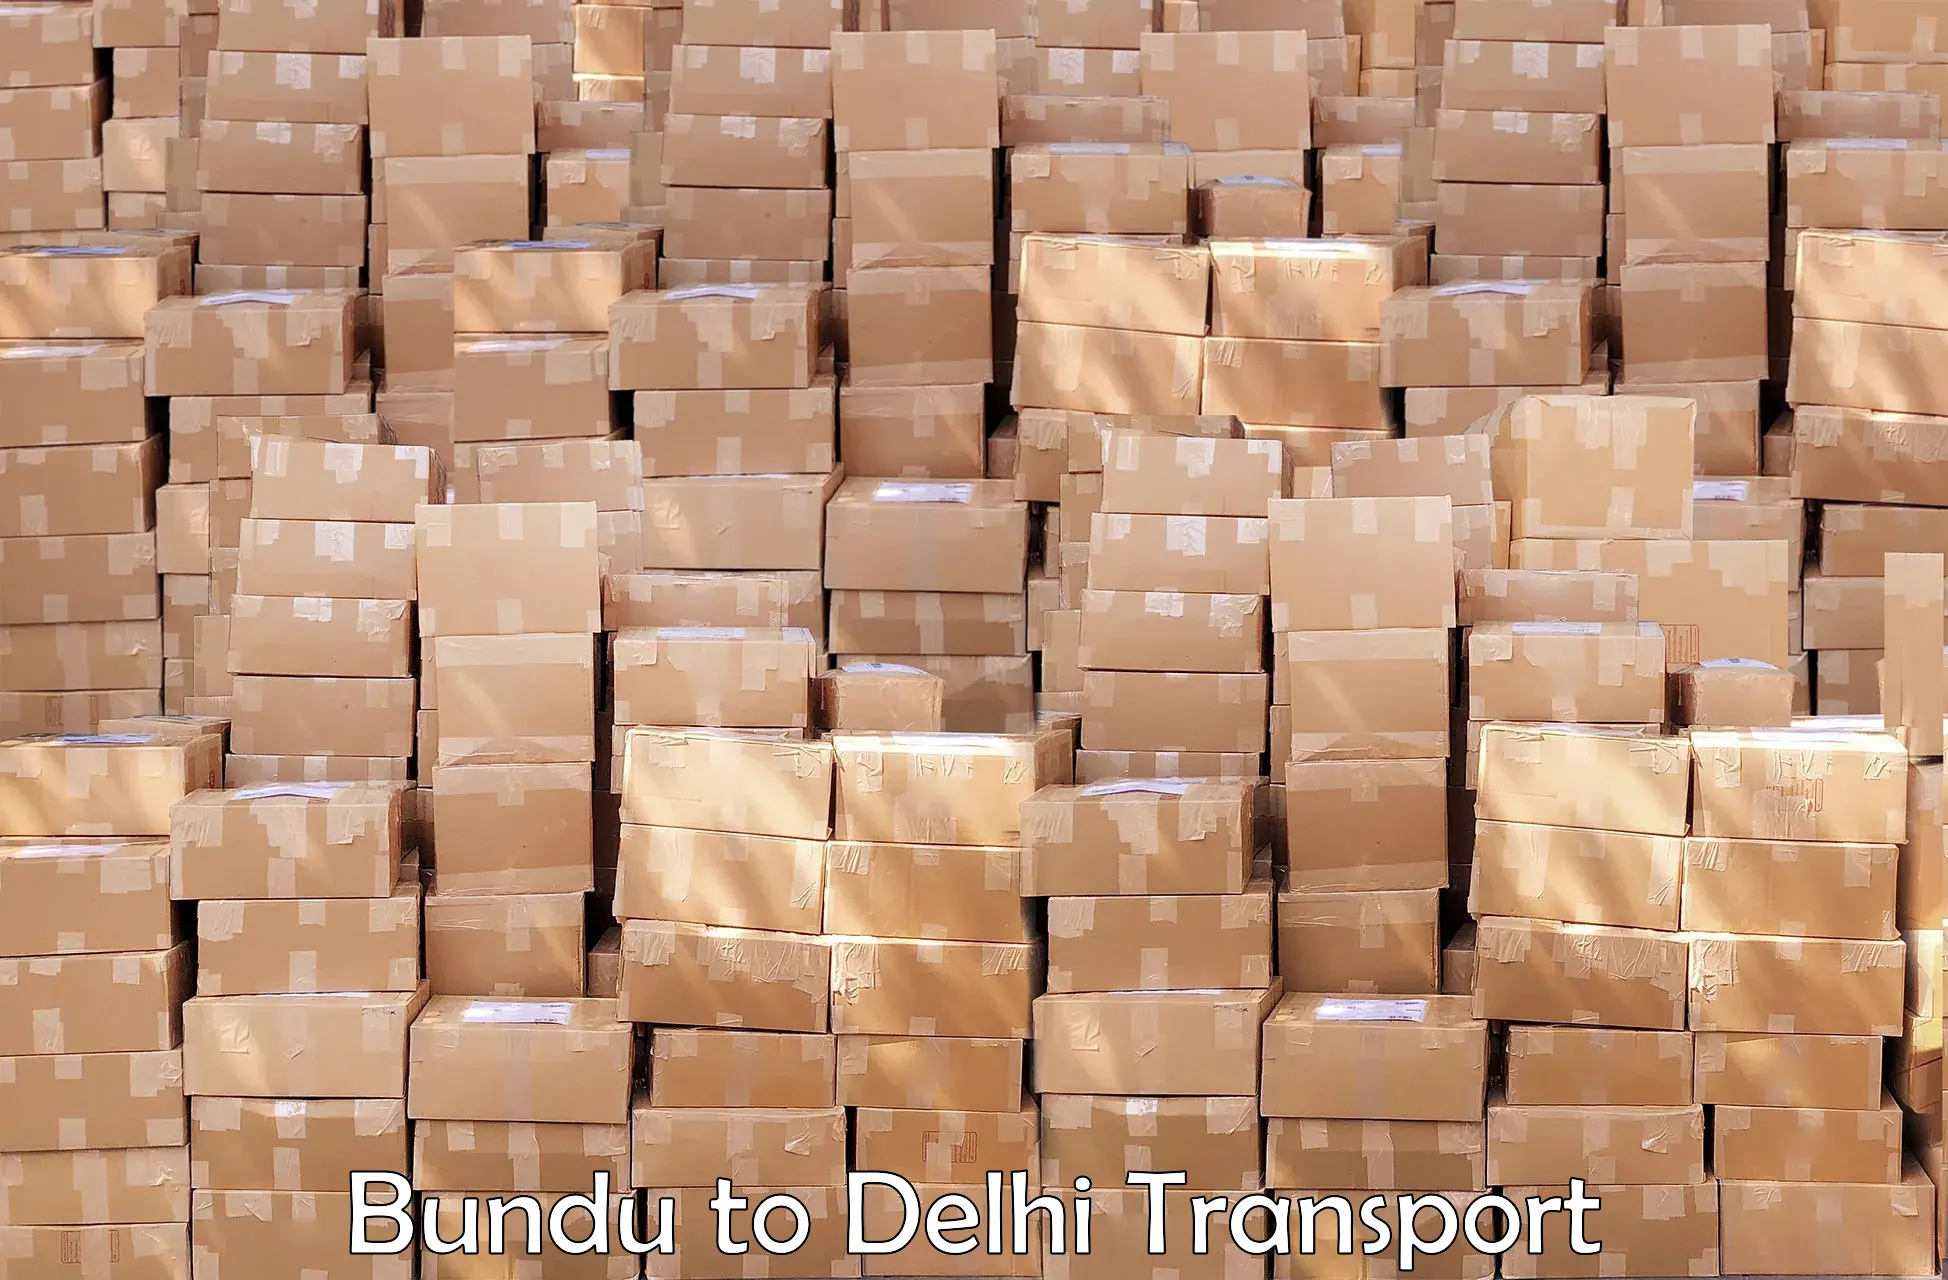 Air freight transport services Bundu to NCR